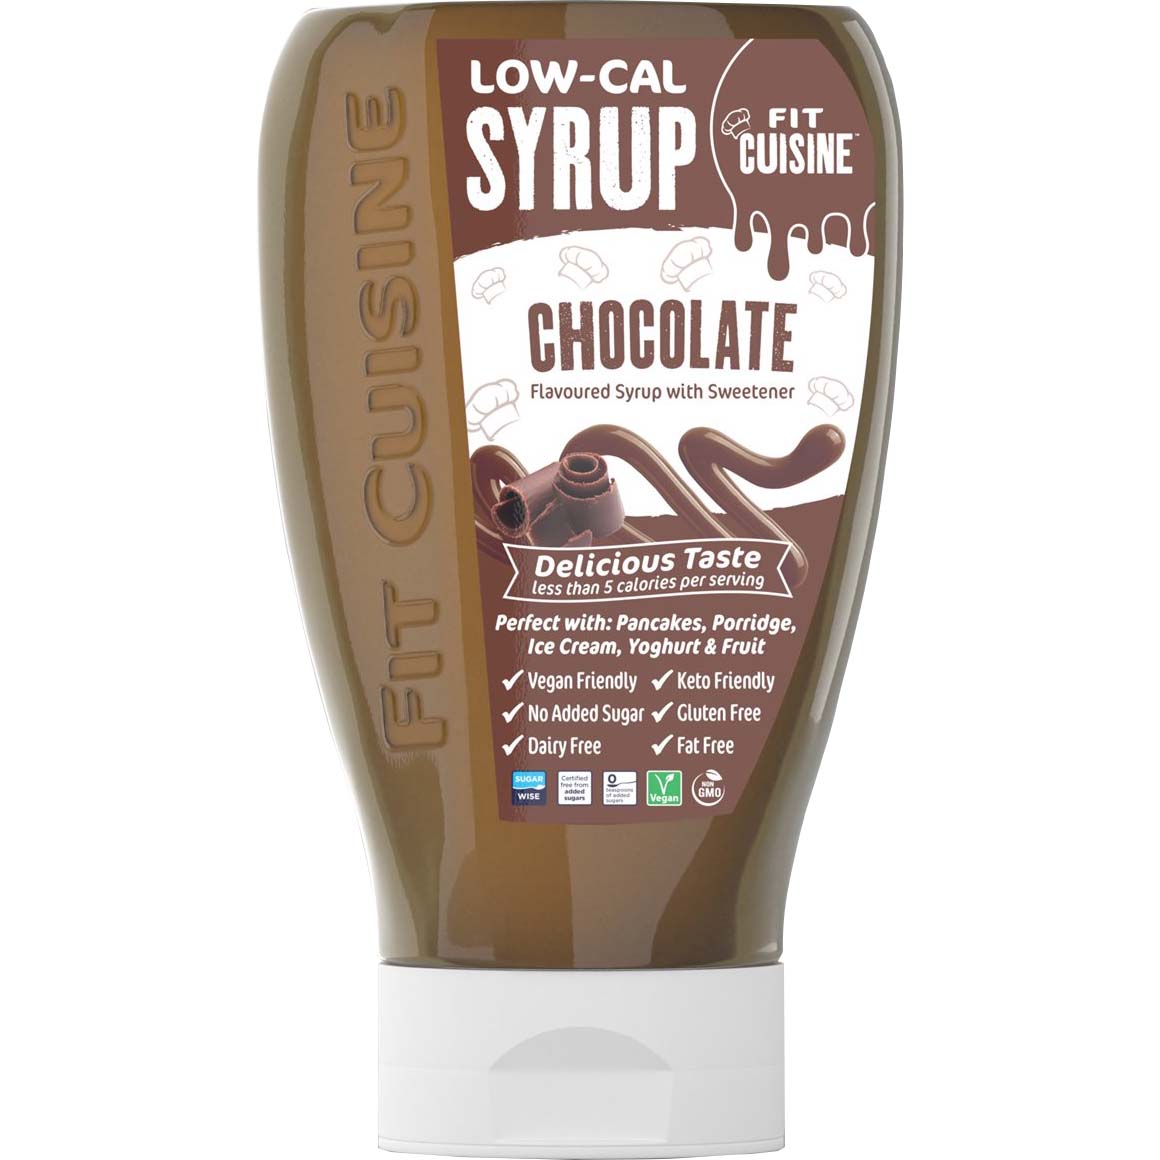 Applied Nutrition Low Cal Syrup Chocolate